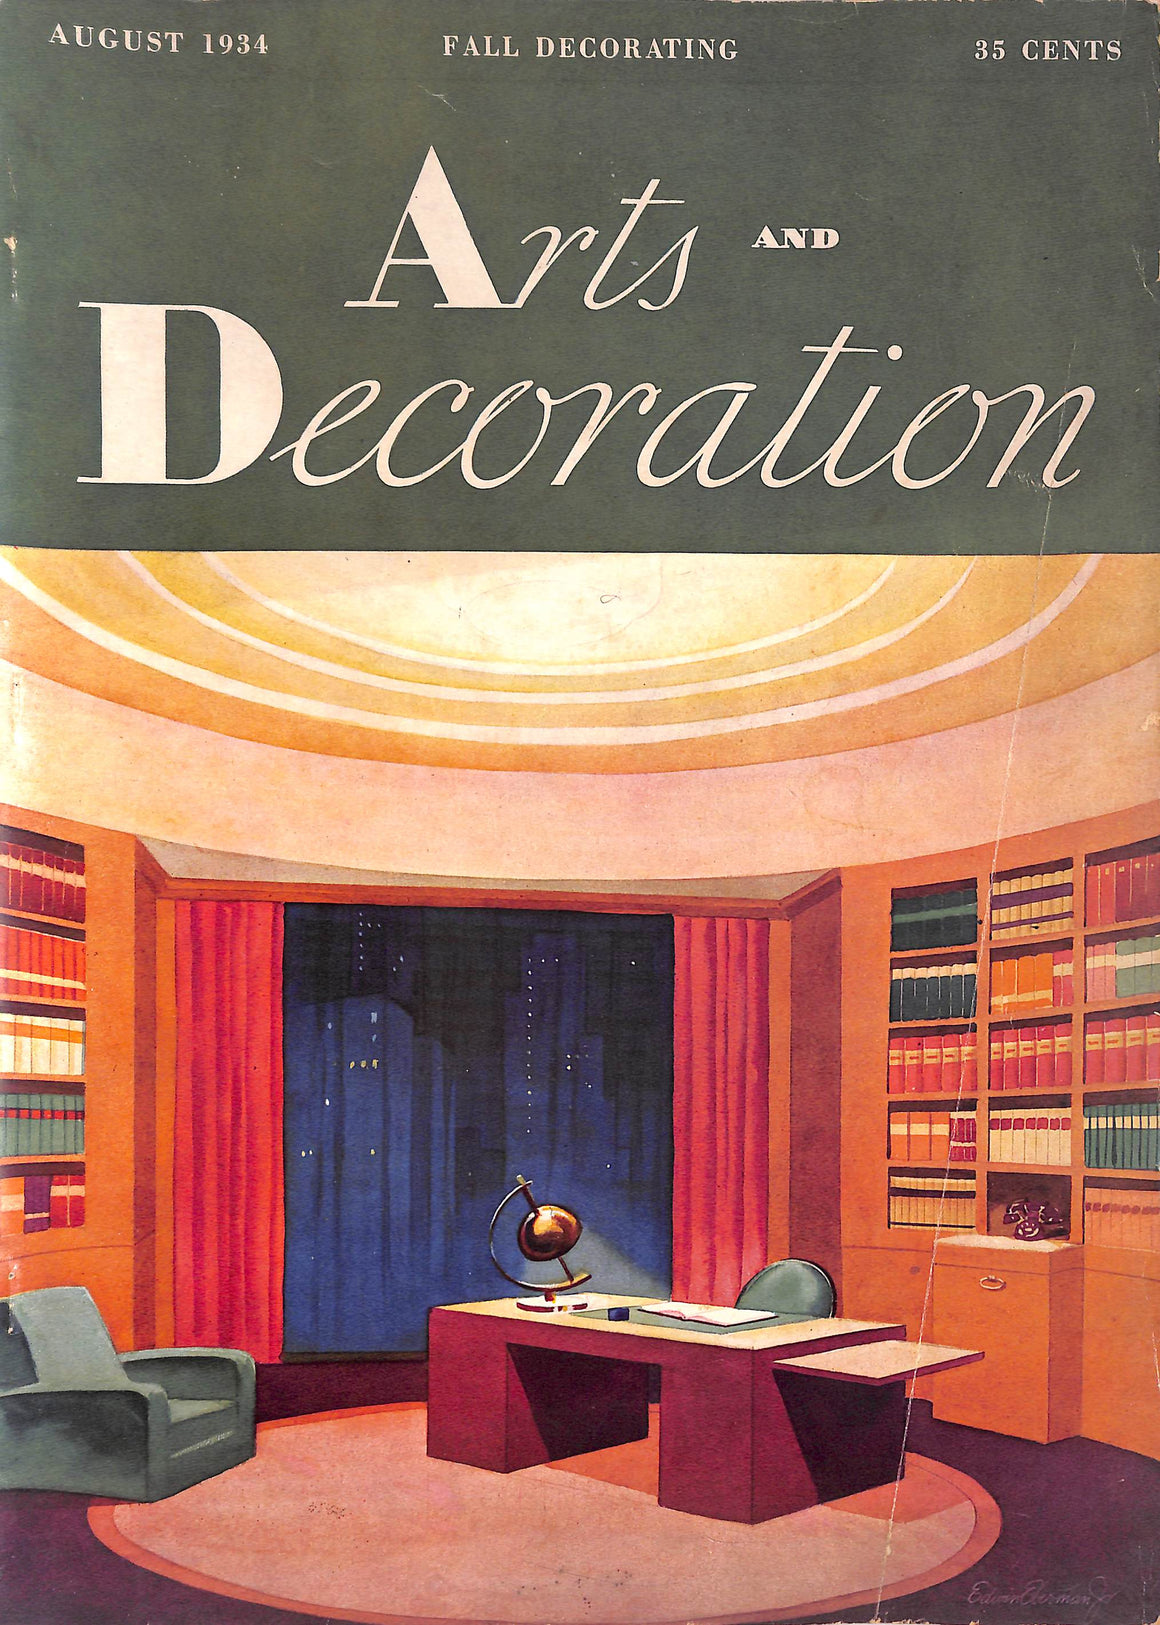 Arts And Decoration Fall Decorating August 1934